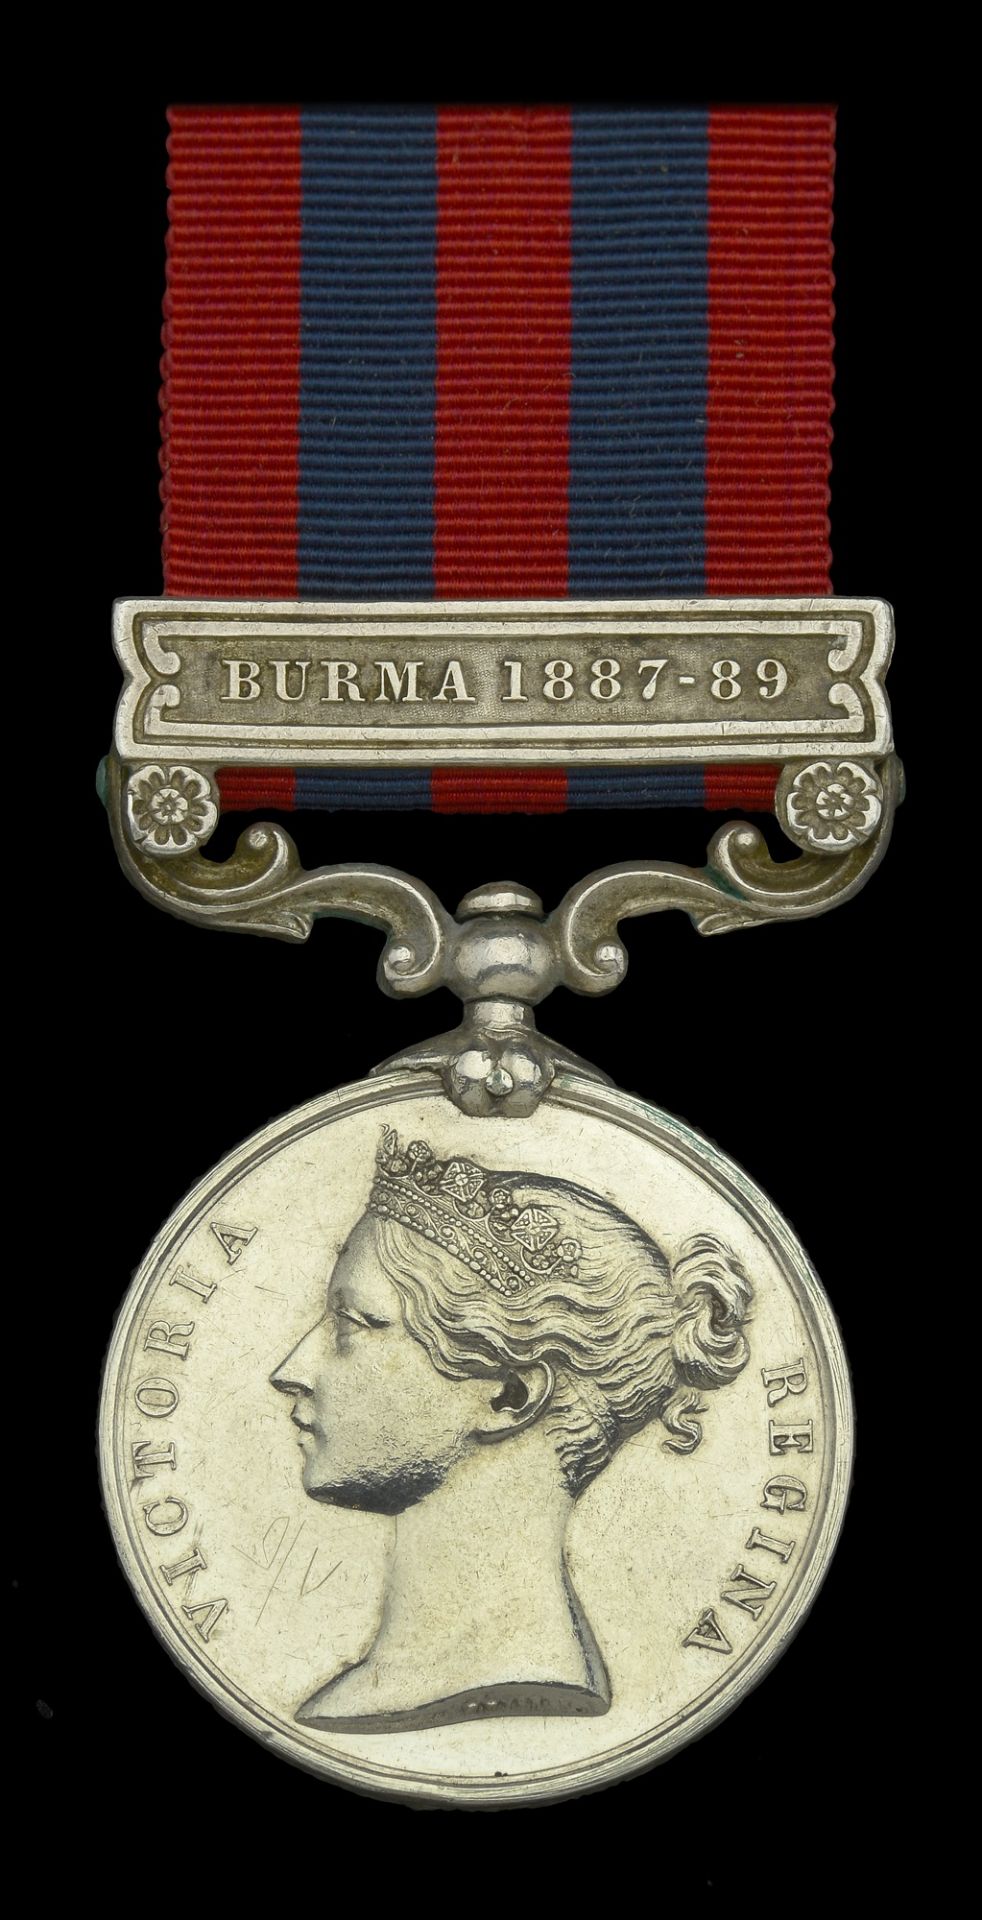 India General Service 1854-95, 1 clasp, Burma 1887-89 (1983 Pte. J. Baker 2d. Bn. Ches. R.)...